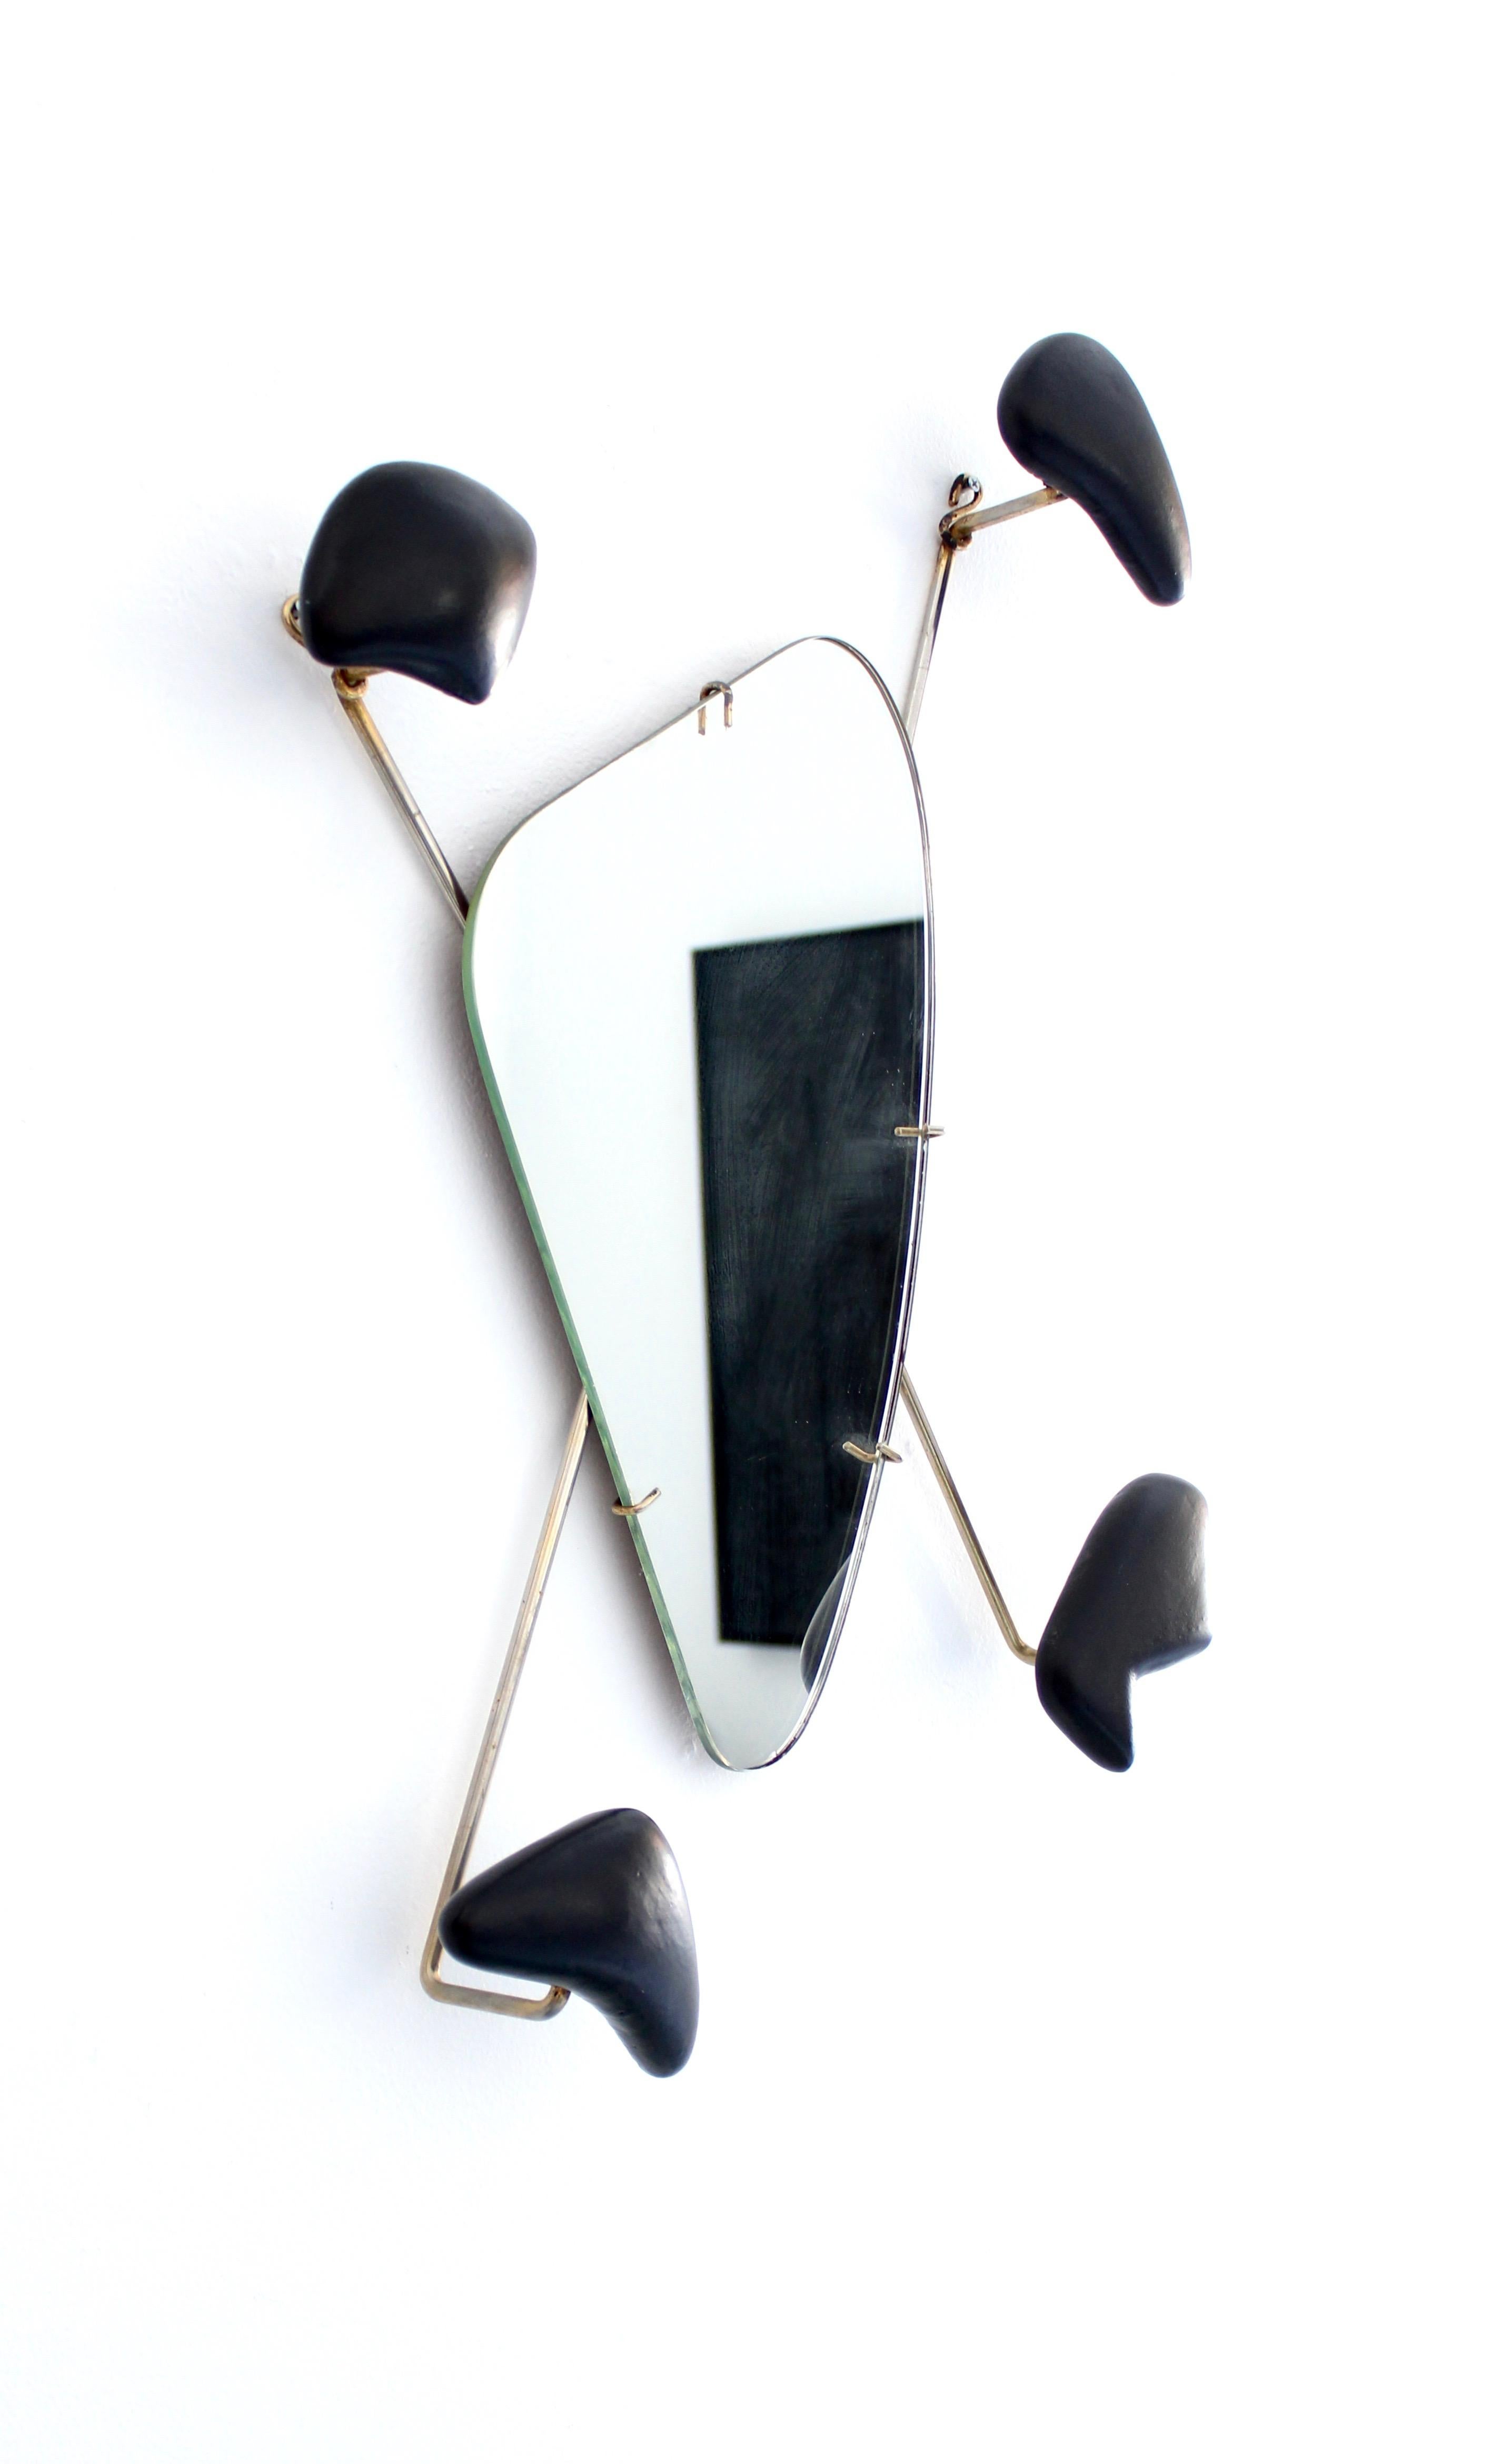 Mid-20th Century Georges Jouve Black Ceramic Coat Rack with Mirror in Brass Frame, circa 1955